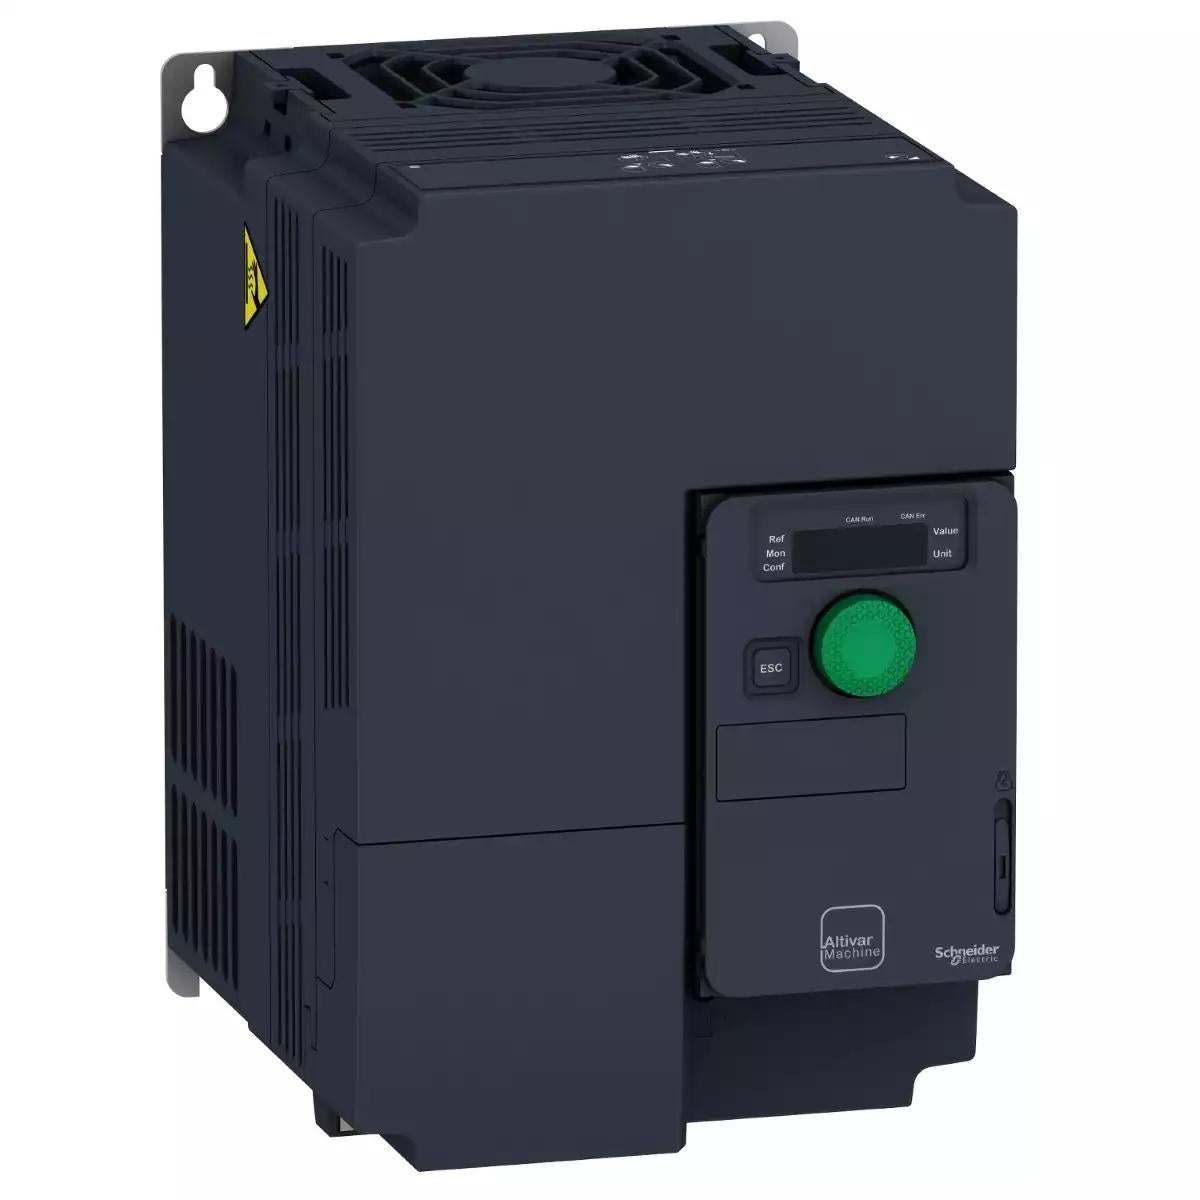 Schneider Electric Variable speed drive, Altivar Machine ATV320, 5.5 kW, 380...500 V, 3 phases, compact